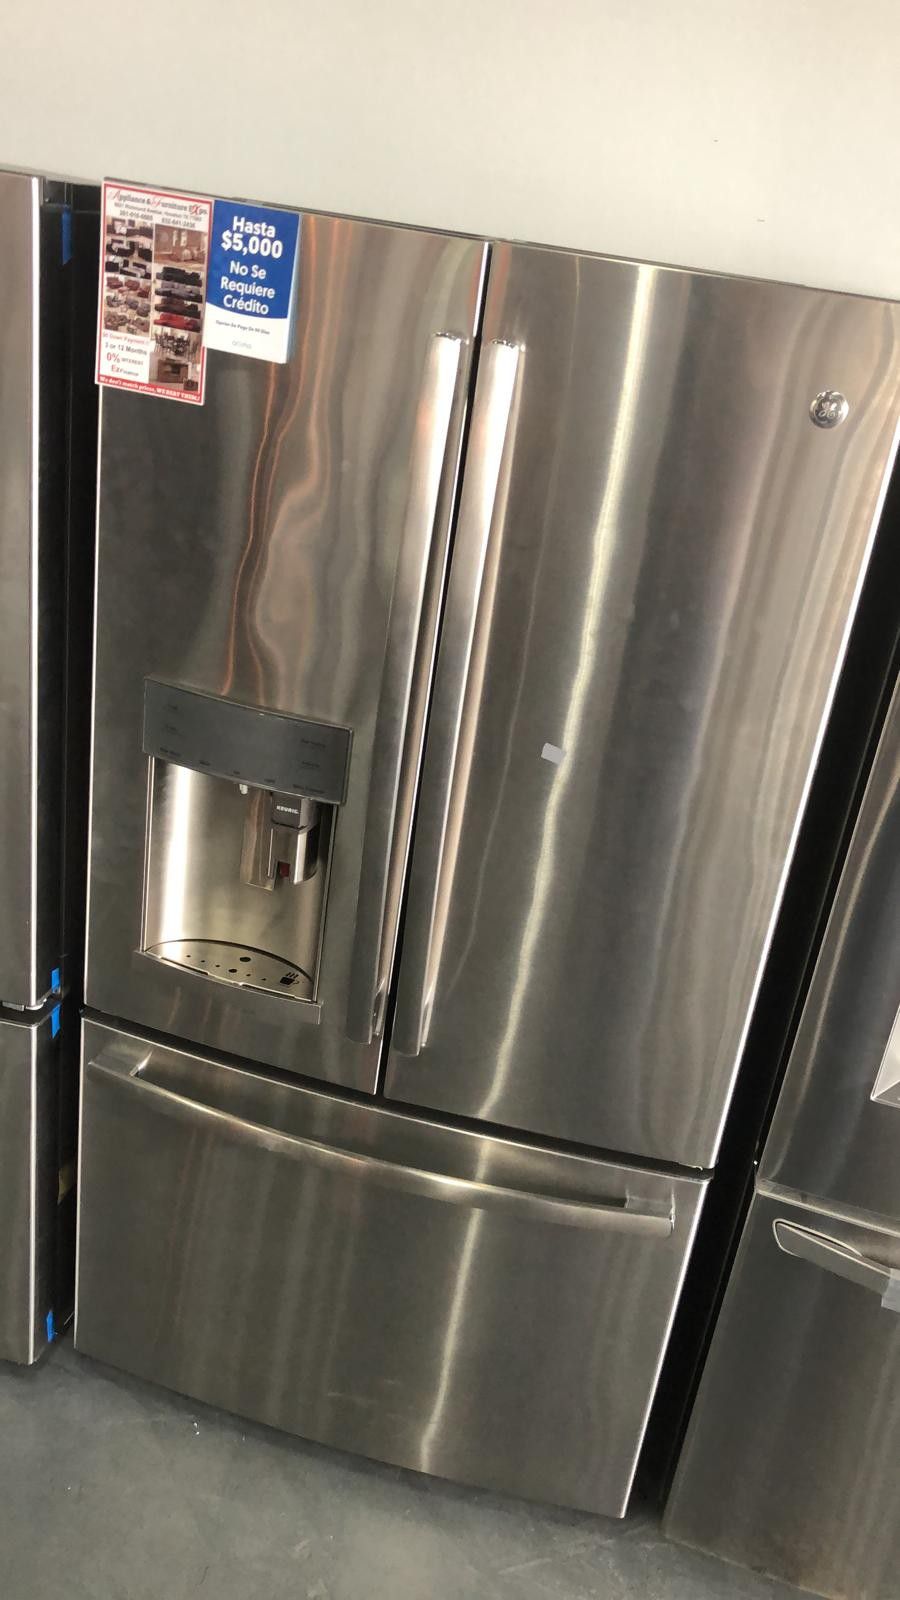 New GE 28 cu. Ft. 3 Door French Stainless Steel Refrigerator. Coffee maker, water & ice Dispenser 🔥 39$ Down